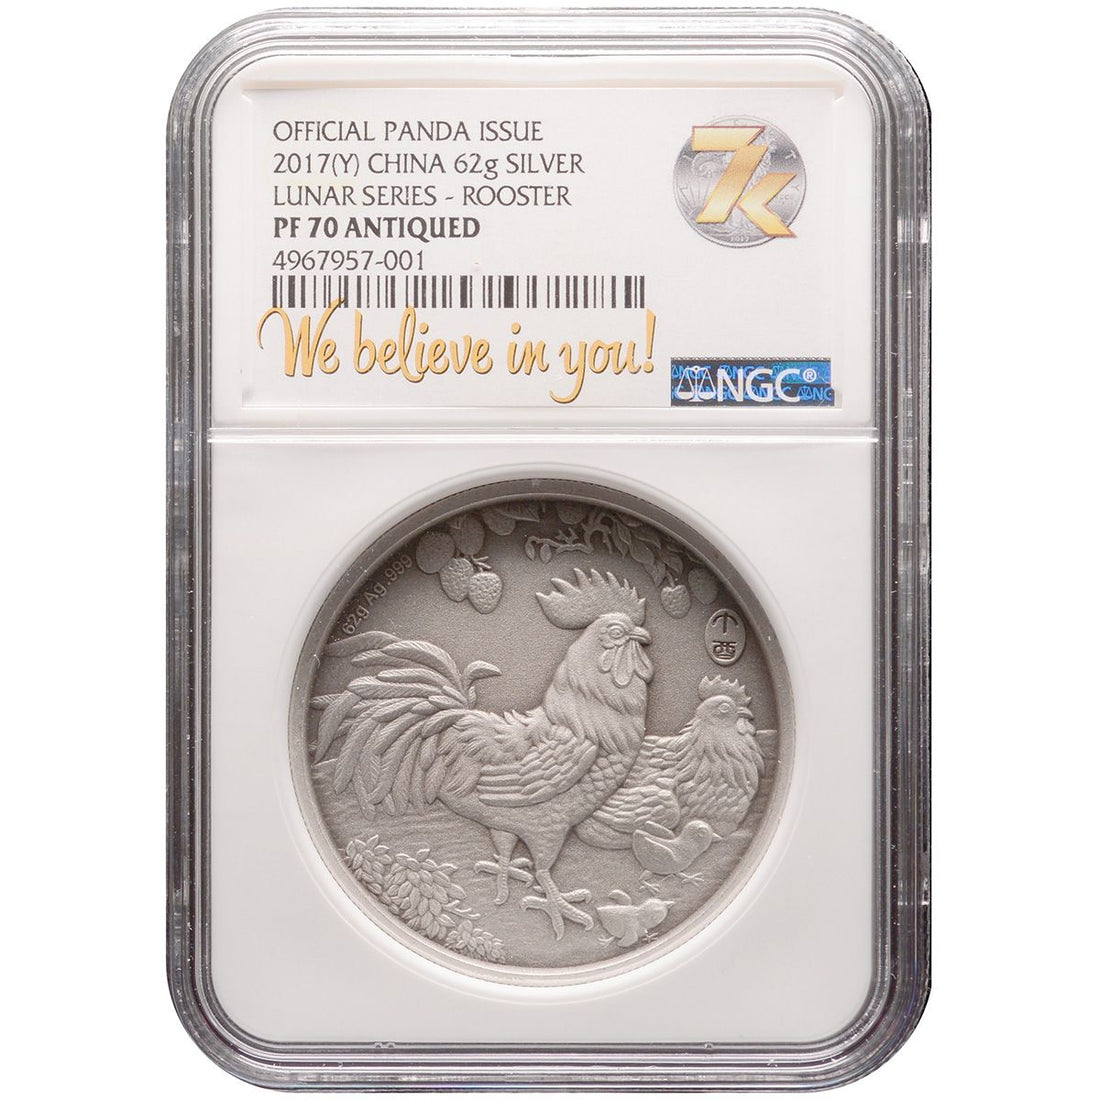 2017 2 oz YEAR OF THE ROOSTER Silver Coin PF 70 Lunar Series - China (Shenyang) - OZB